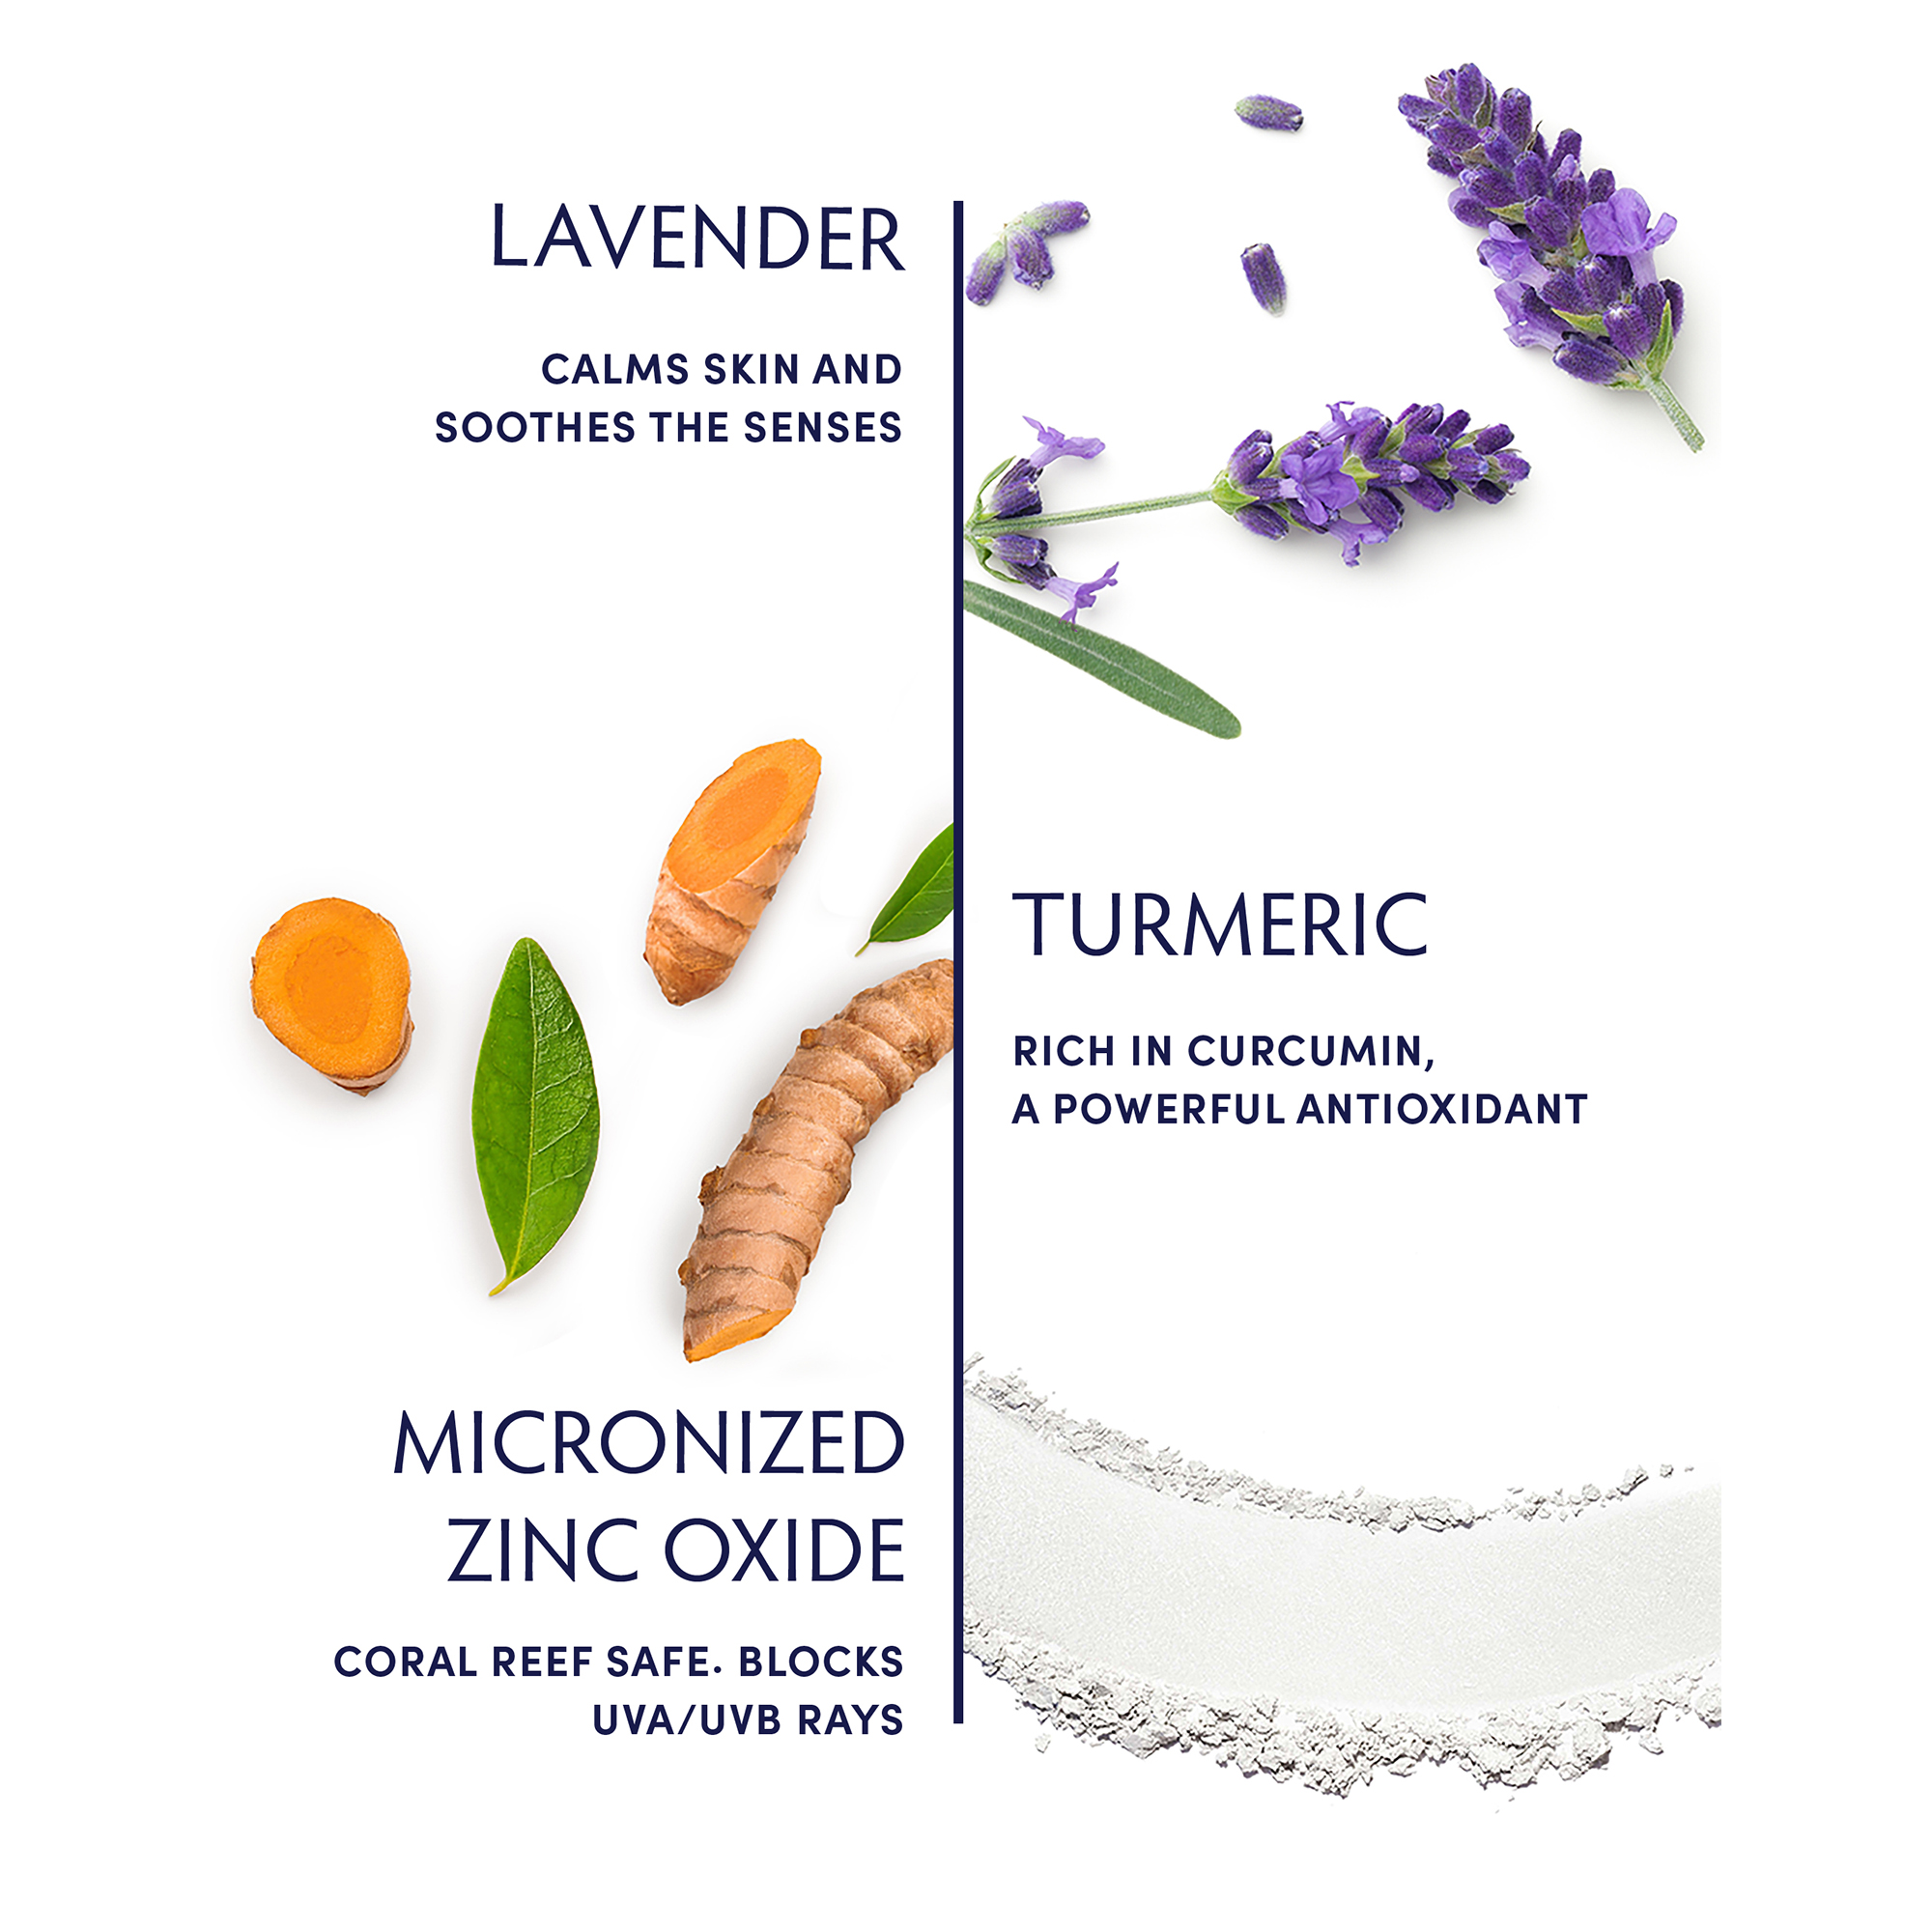 Lavender calms the skin and soothes the senses, Turmeric, rich is curcumin, a powerful anitoxidant, micronized zinc oxide, coral reef safe, blocks UVA/UVB rays 